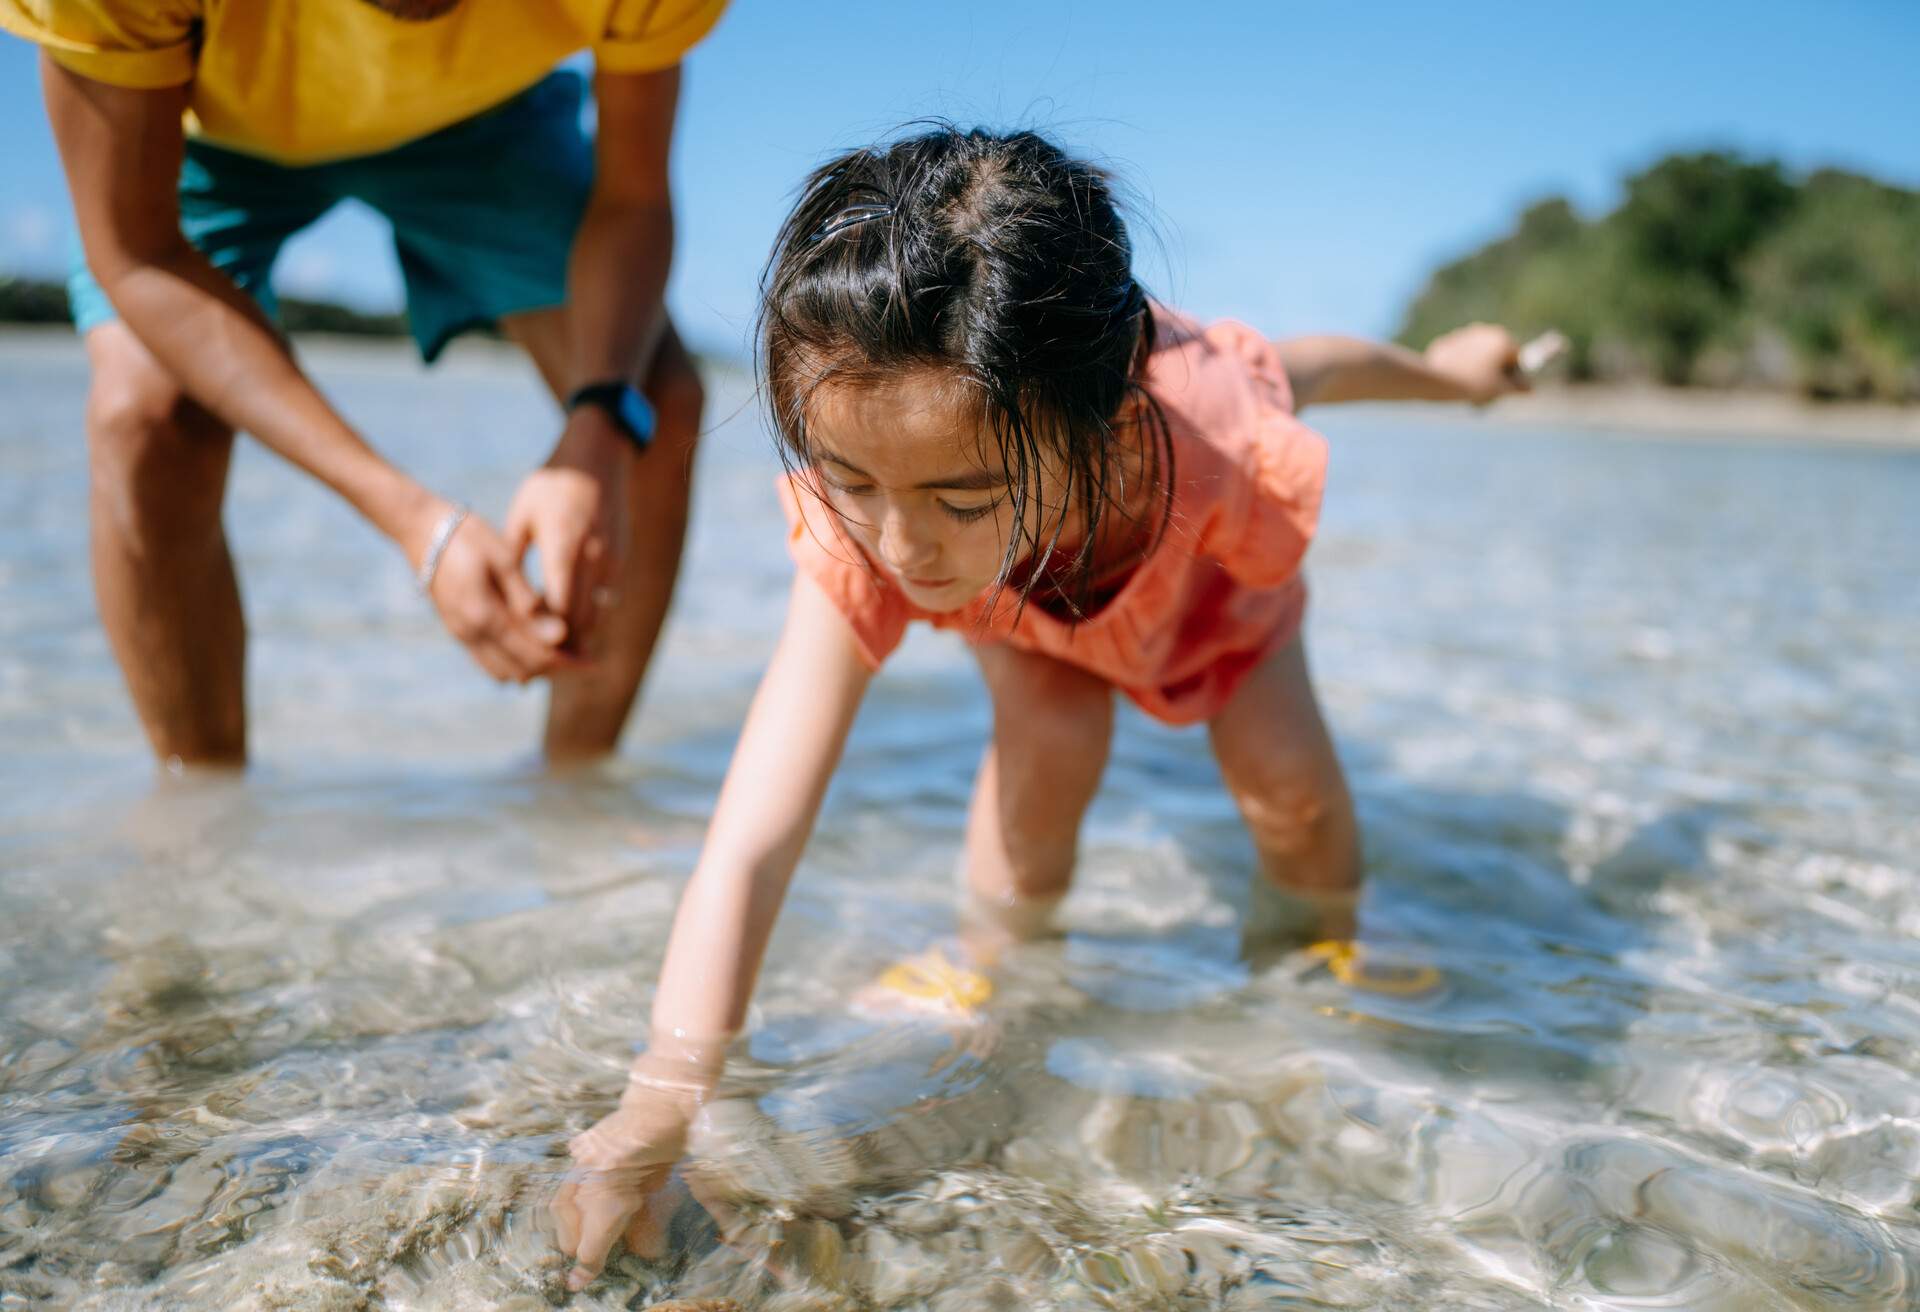 Cute young daughter playing in shallow tropical water, Iriomote-Ishigaki National Park of the Yaeyama Islands, Okinawa, Japan